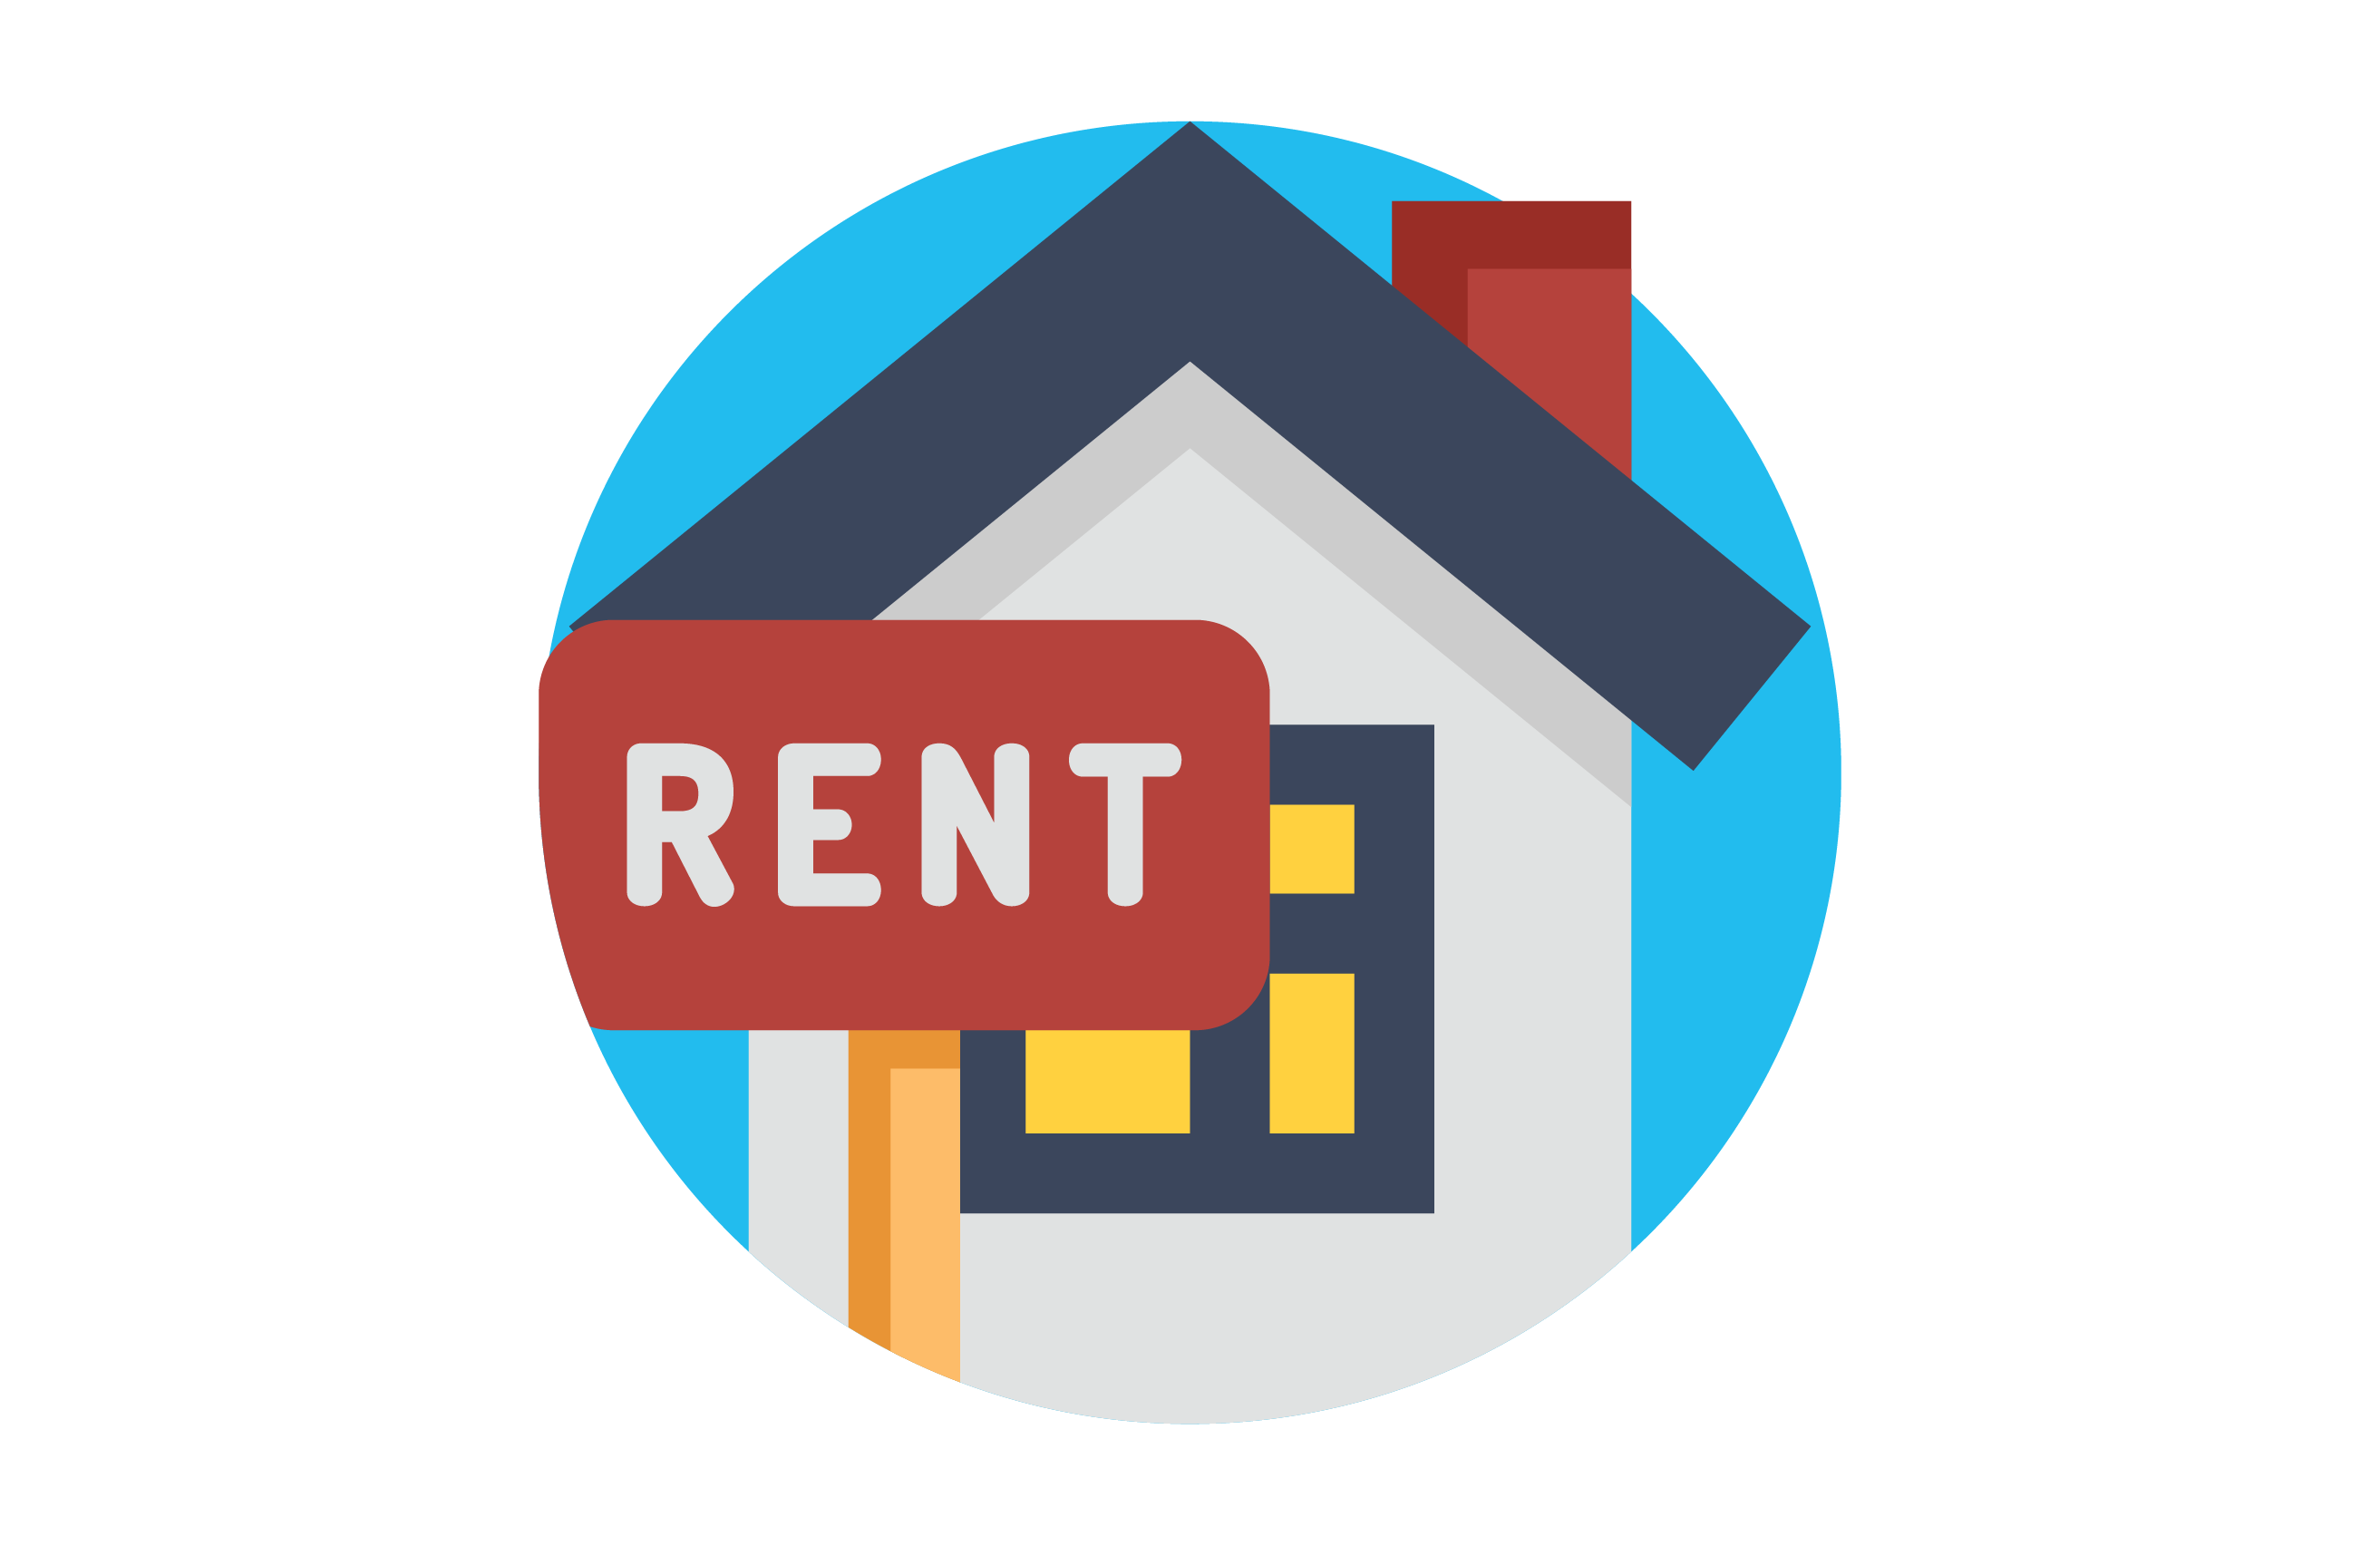 10 Tips To Mitigate Tenant Problems & Evictions – Do You Have The Right Landlord Tools